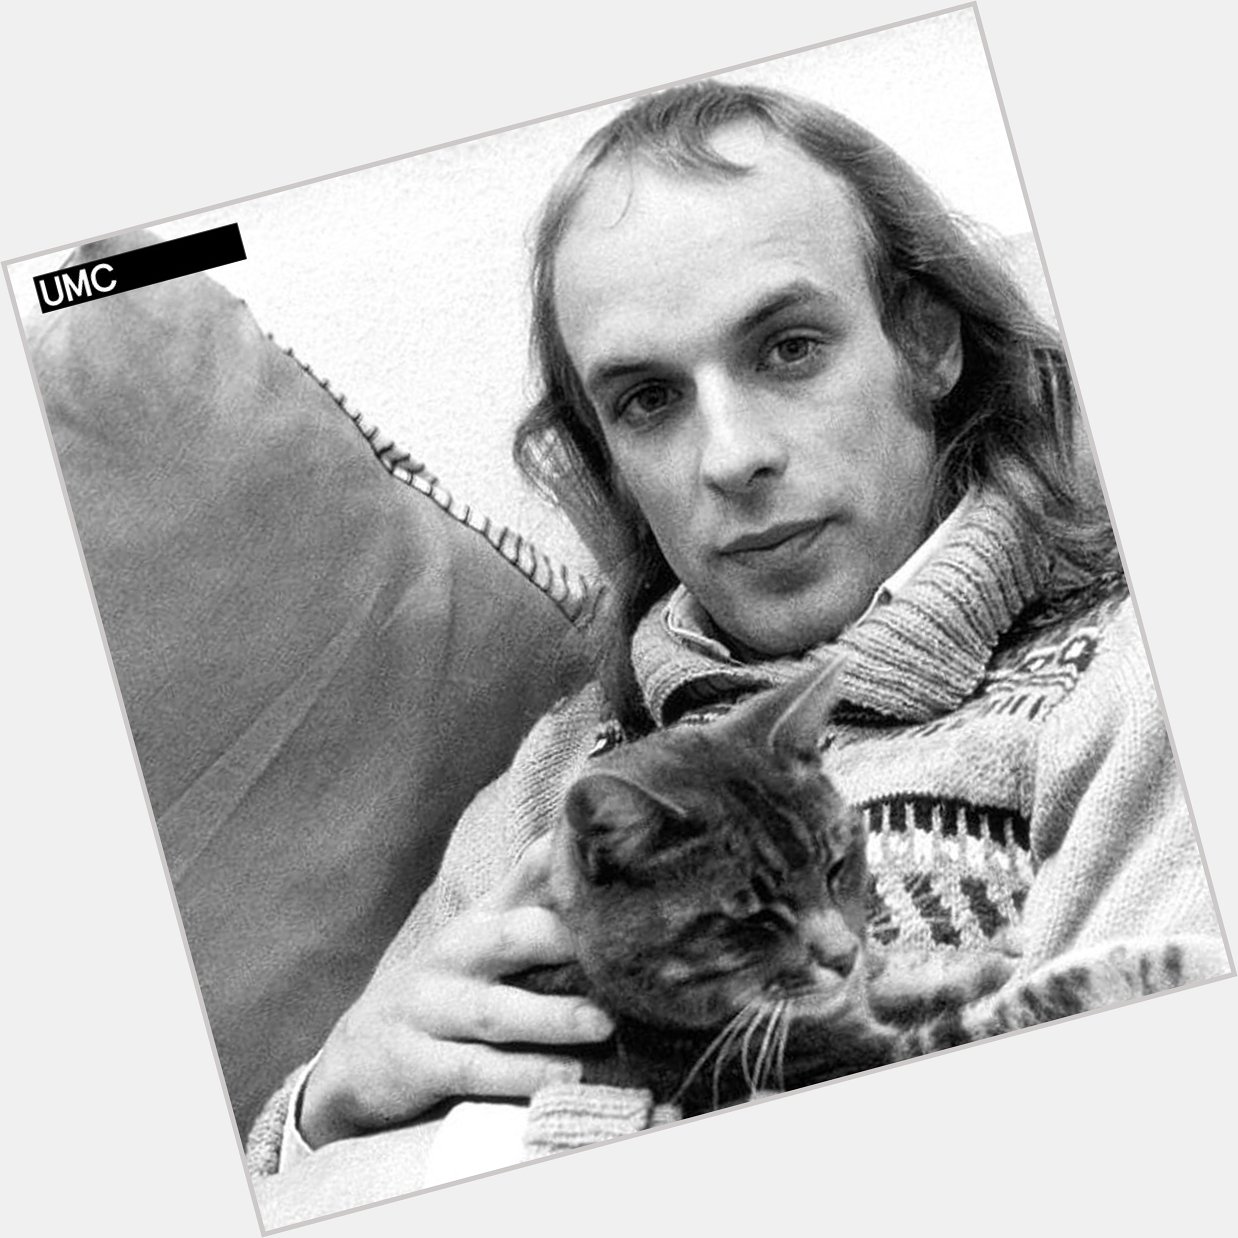 Happy birthday to the one and only Brian Eno! 